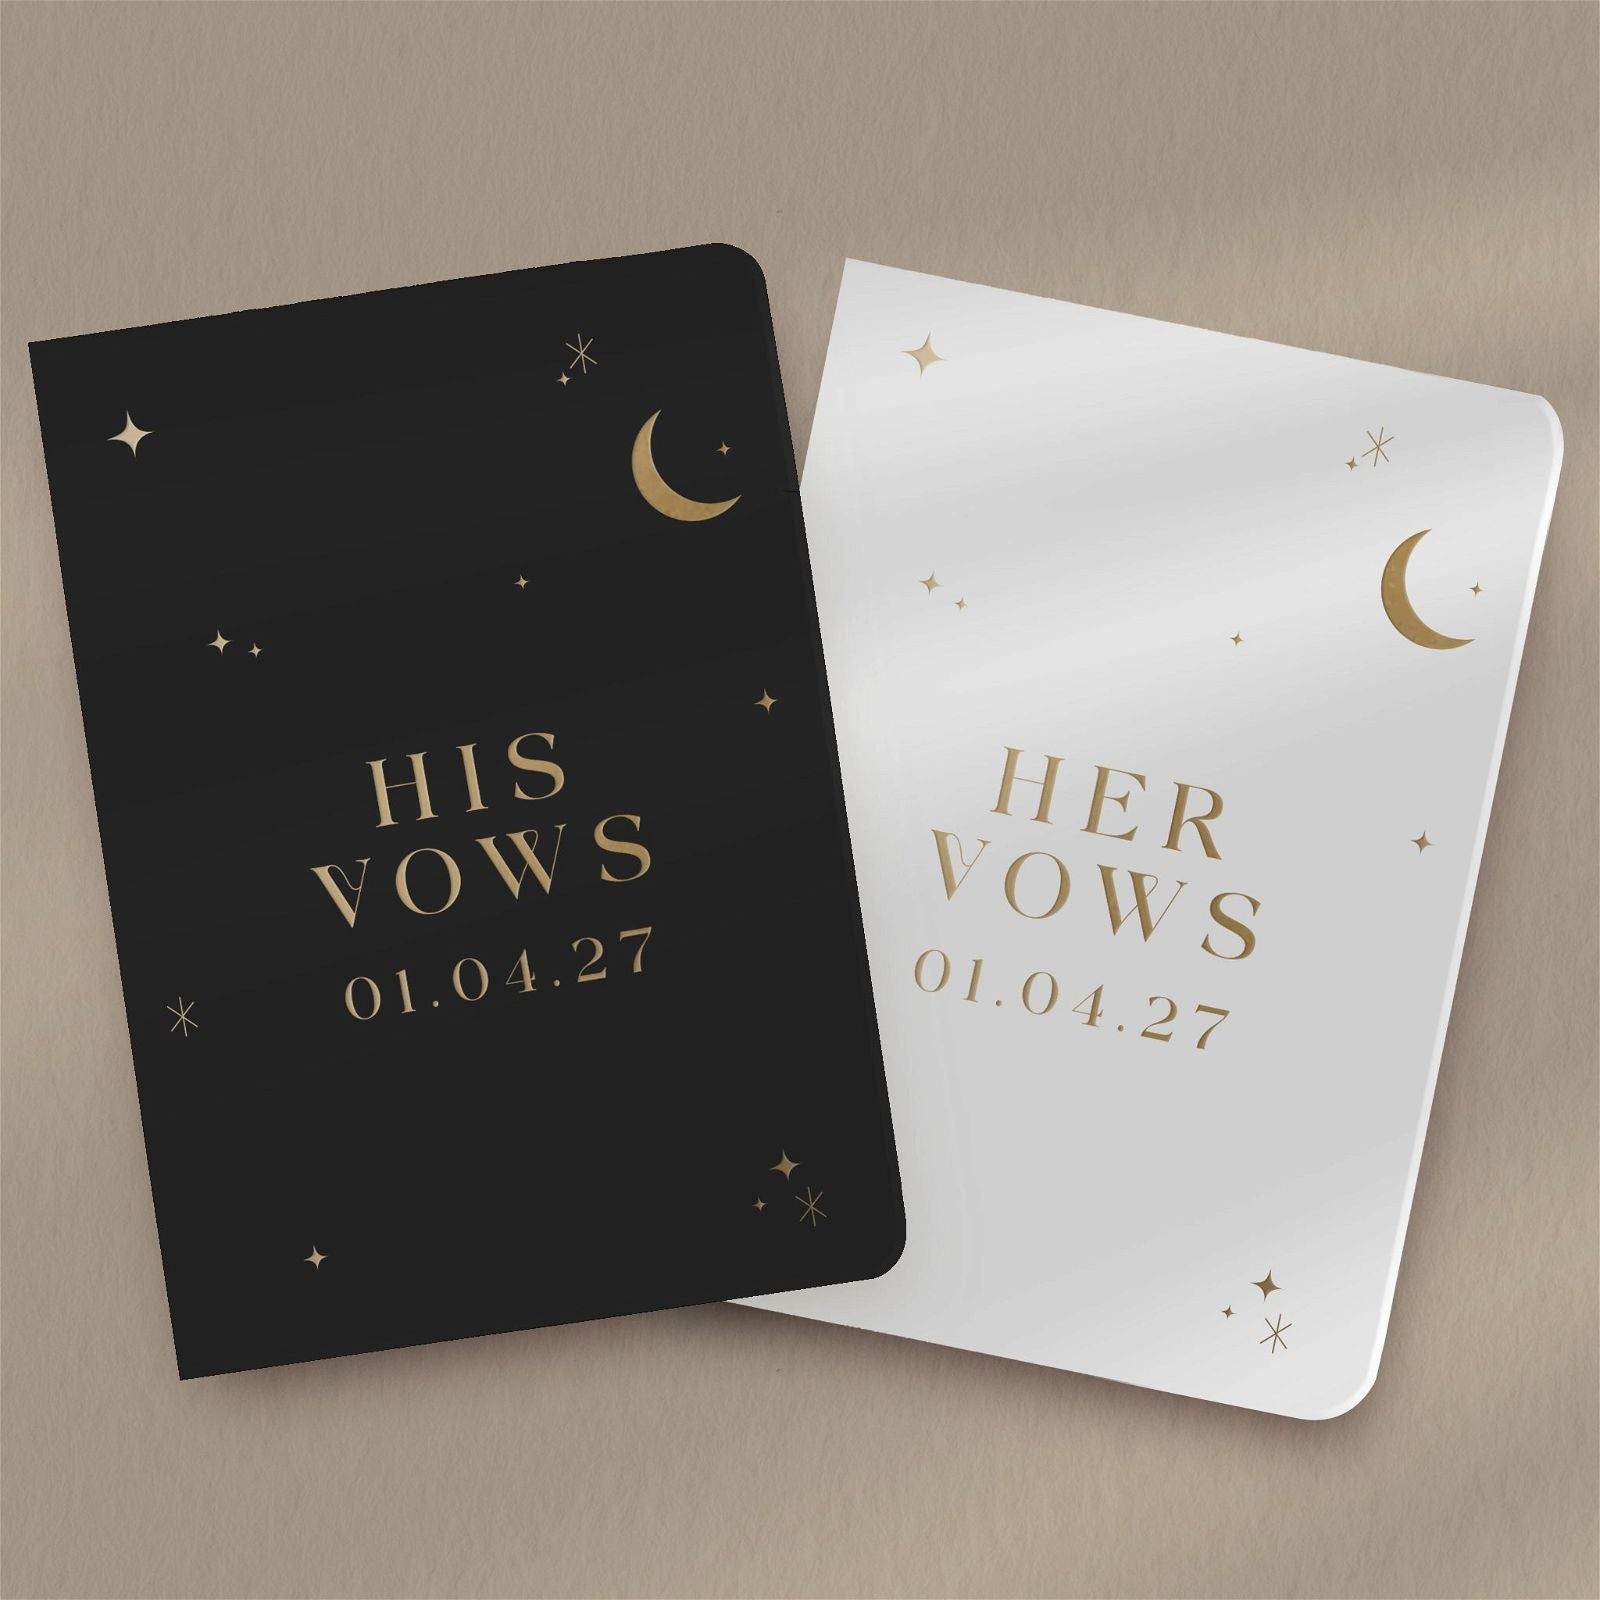 Moon & Stars Vow Books  Ivy and Gold Wedding Stationery   